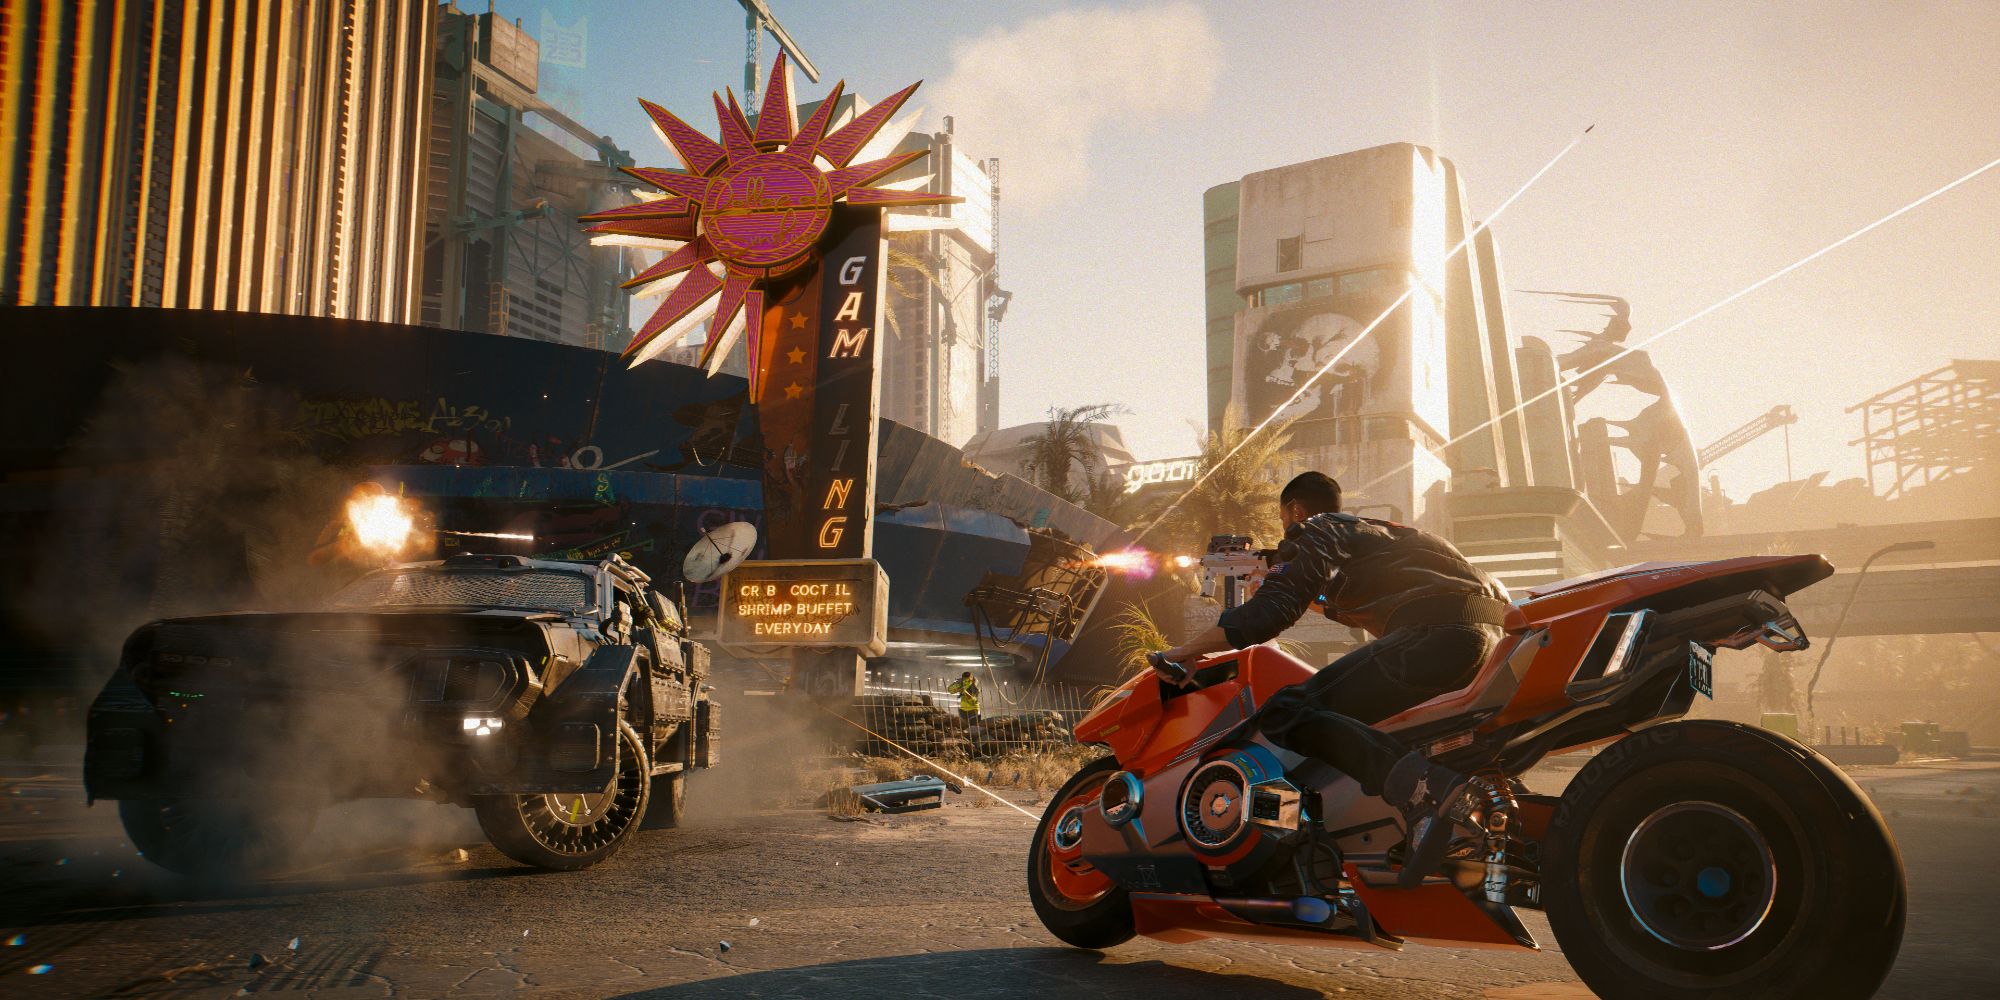 Cyberpunk 2077 Phantom Liberty Official Art With V Attacking Armored Car While Riding Motorcycle